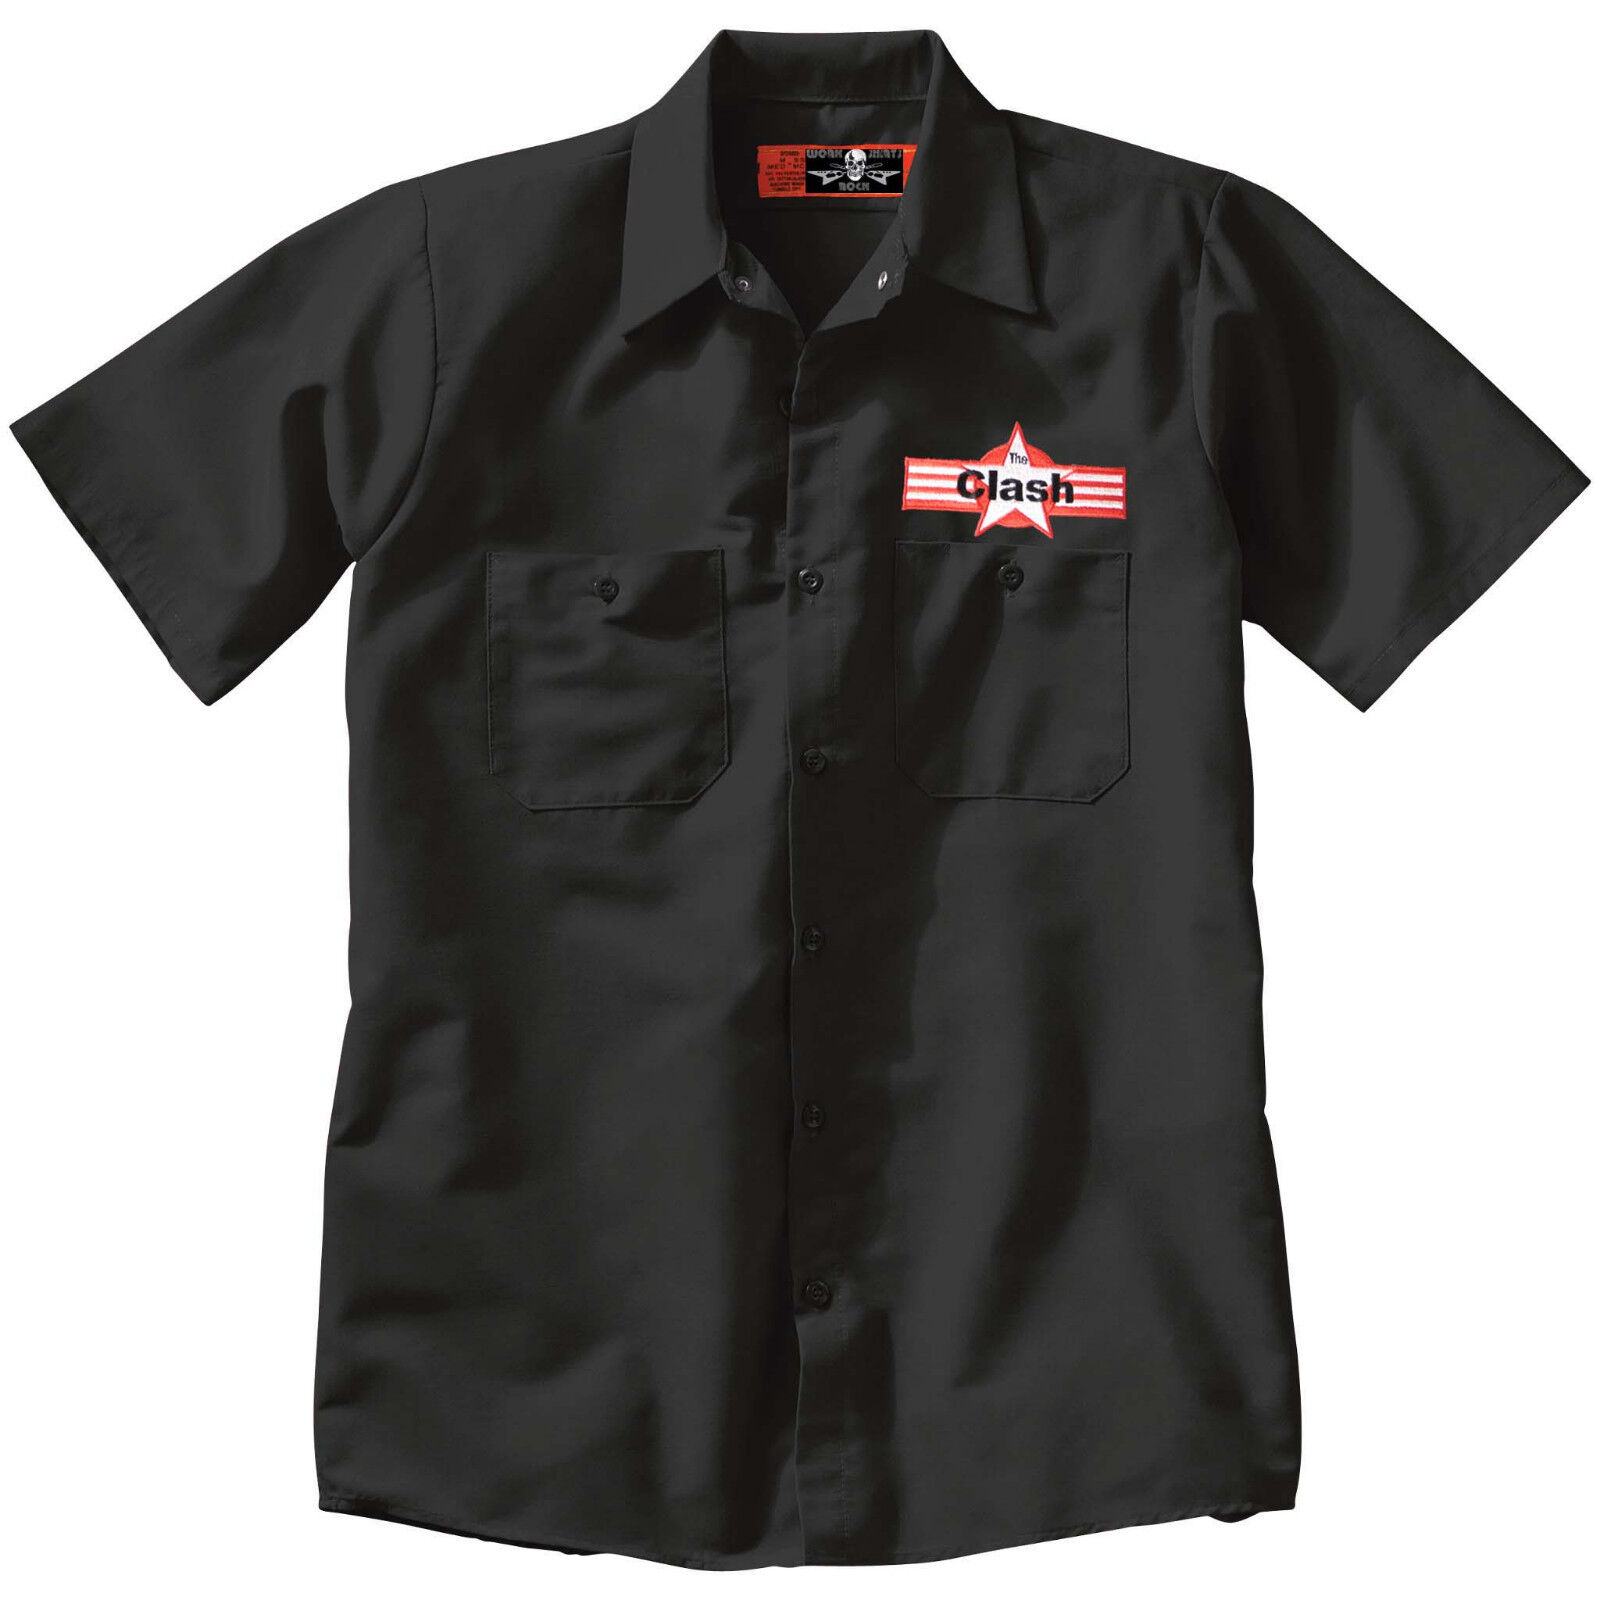 The CLASH Black Button Up Work SHIRT Embroidered Emblem 